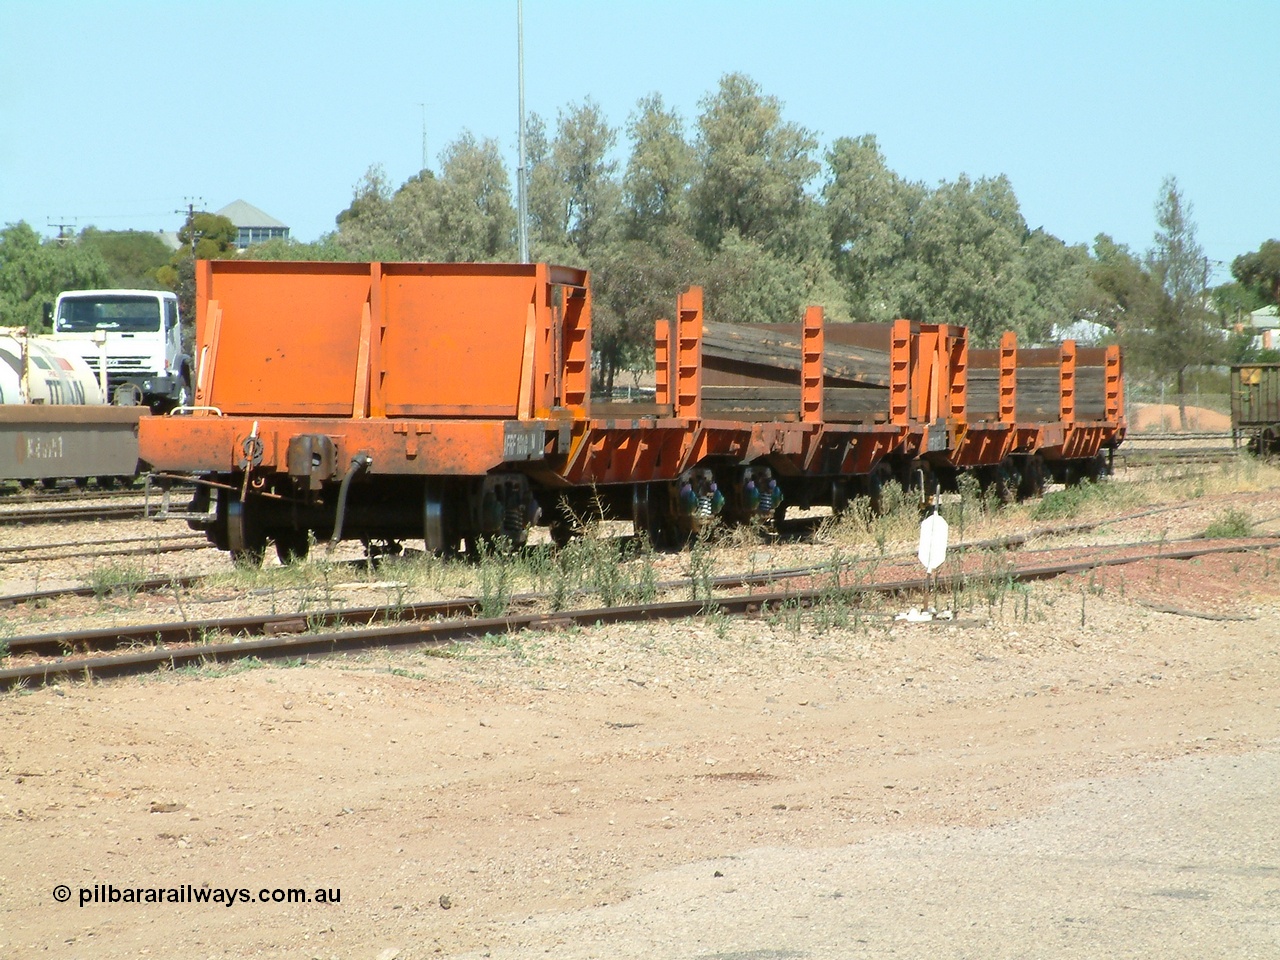 030404 130919
Port Augusta Spencer Junction yard, a couple of AFRF type rail transport waggons await shunting back to Whyalla for reloading during the Darwin line construction. 4th April 2003.
Keywords: AFRF-type;